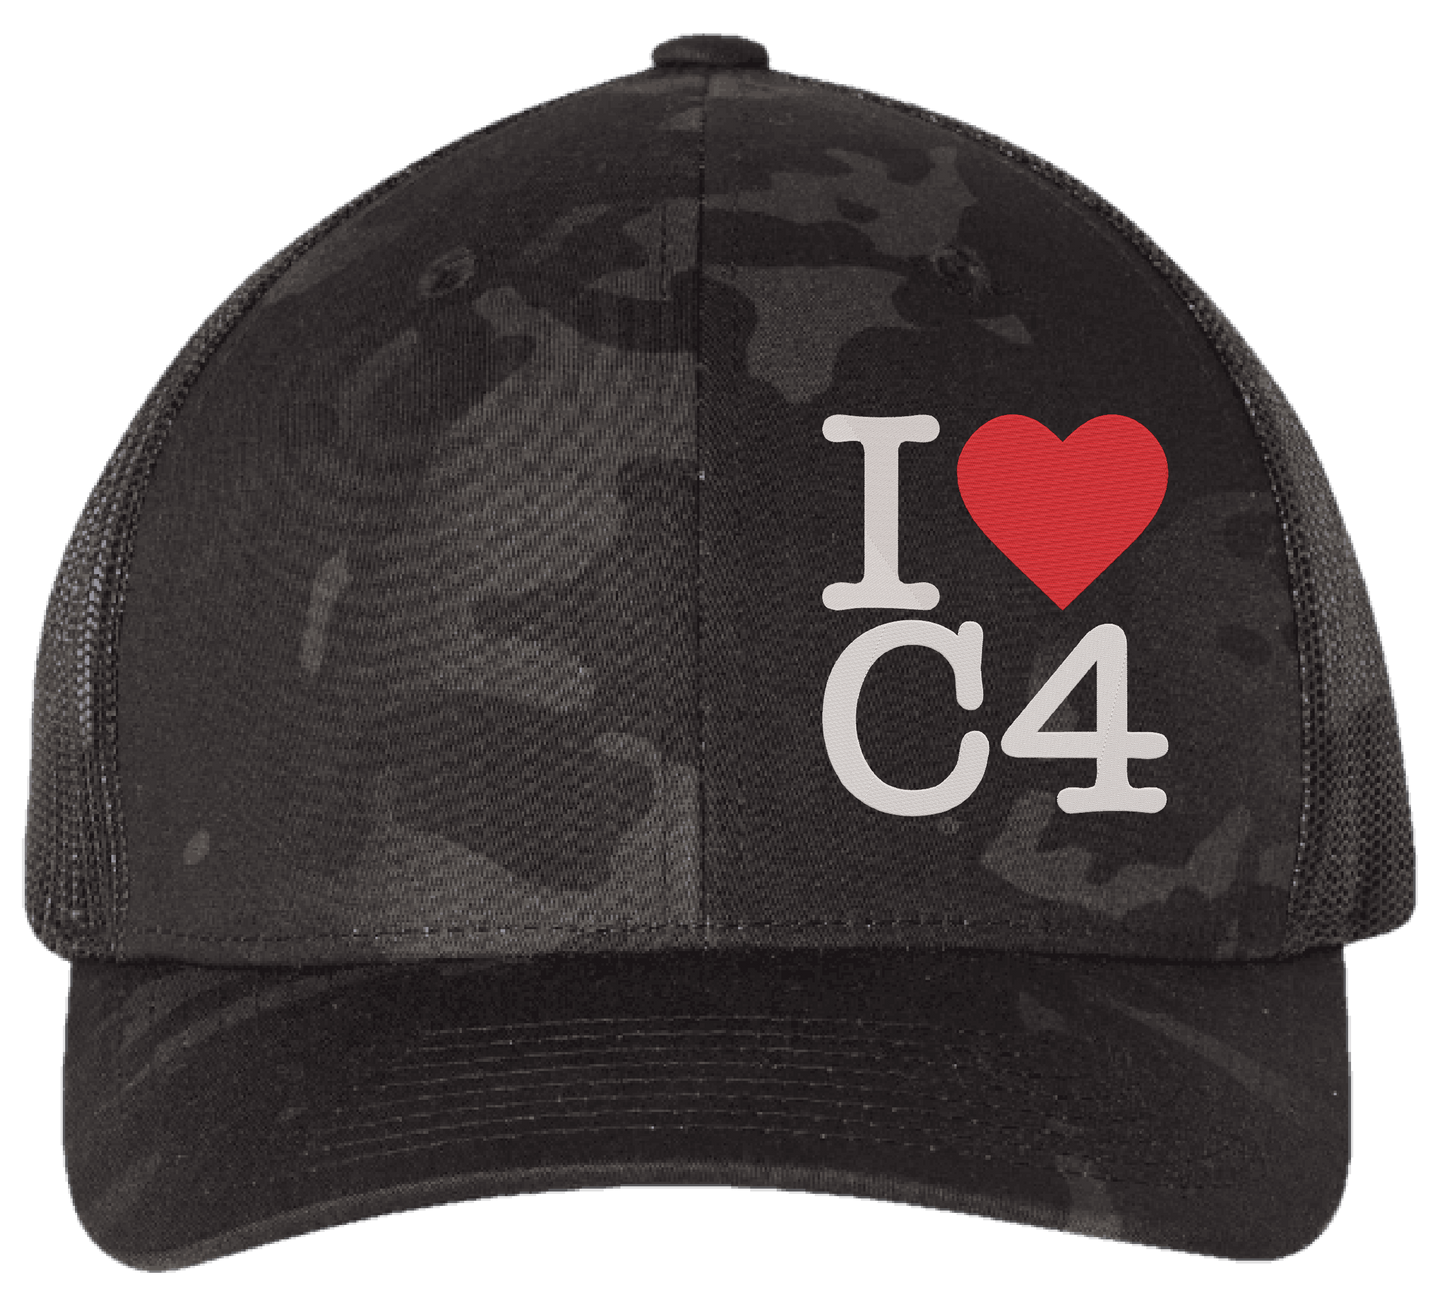 I HEART C4 Embroidered Hat | Multicam/BDU Camo Hat | Trucker/Flat Bill/Curved Bill/Dad Hat | Lots of Styles